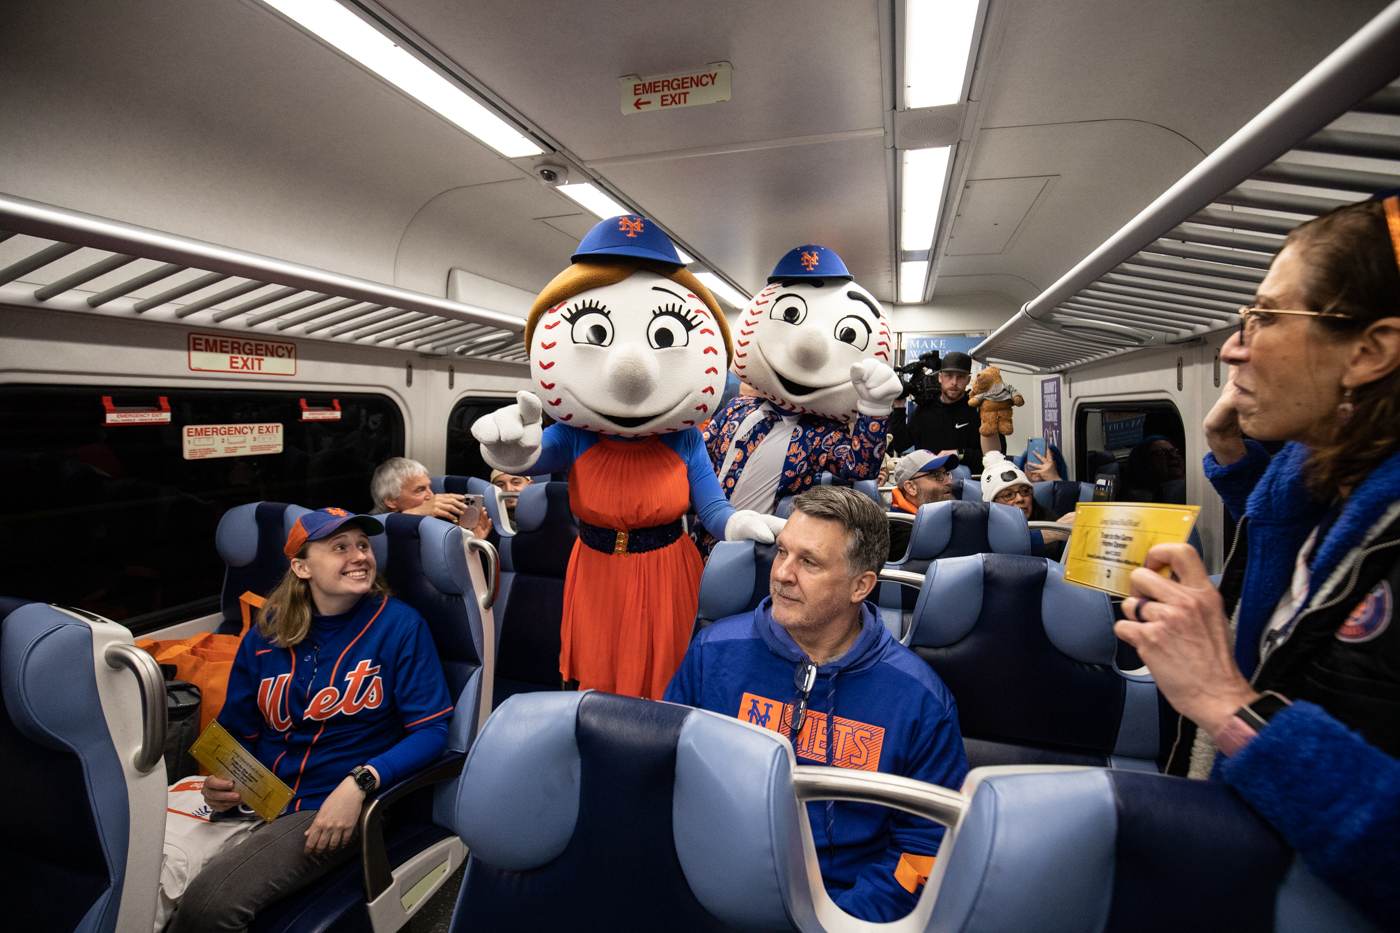 Mr. and Mrs. Met aboard a Long Island Rail Road train car filled with Mets fans